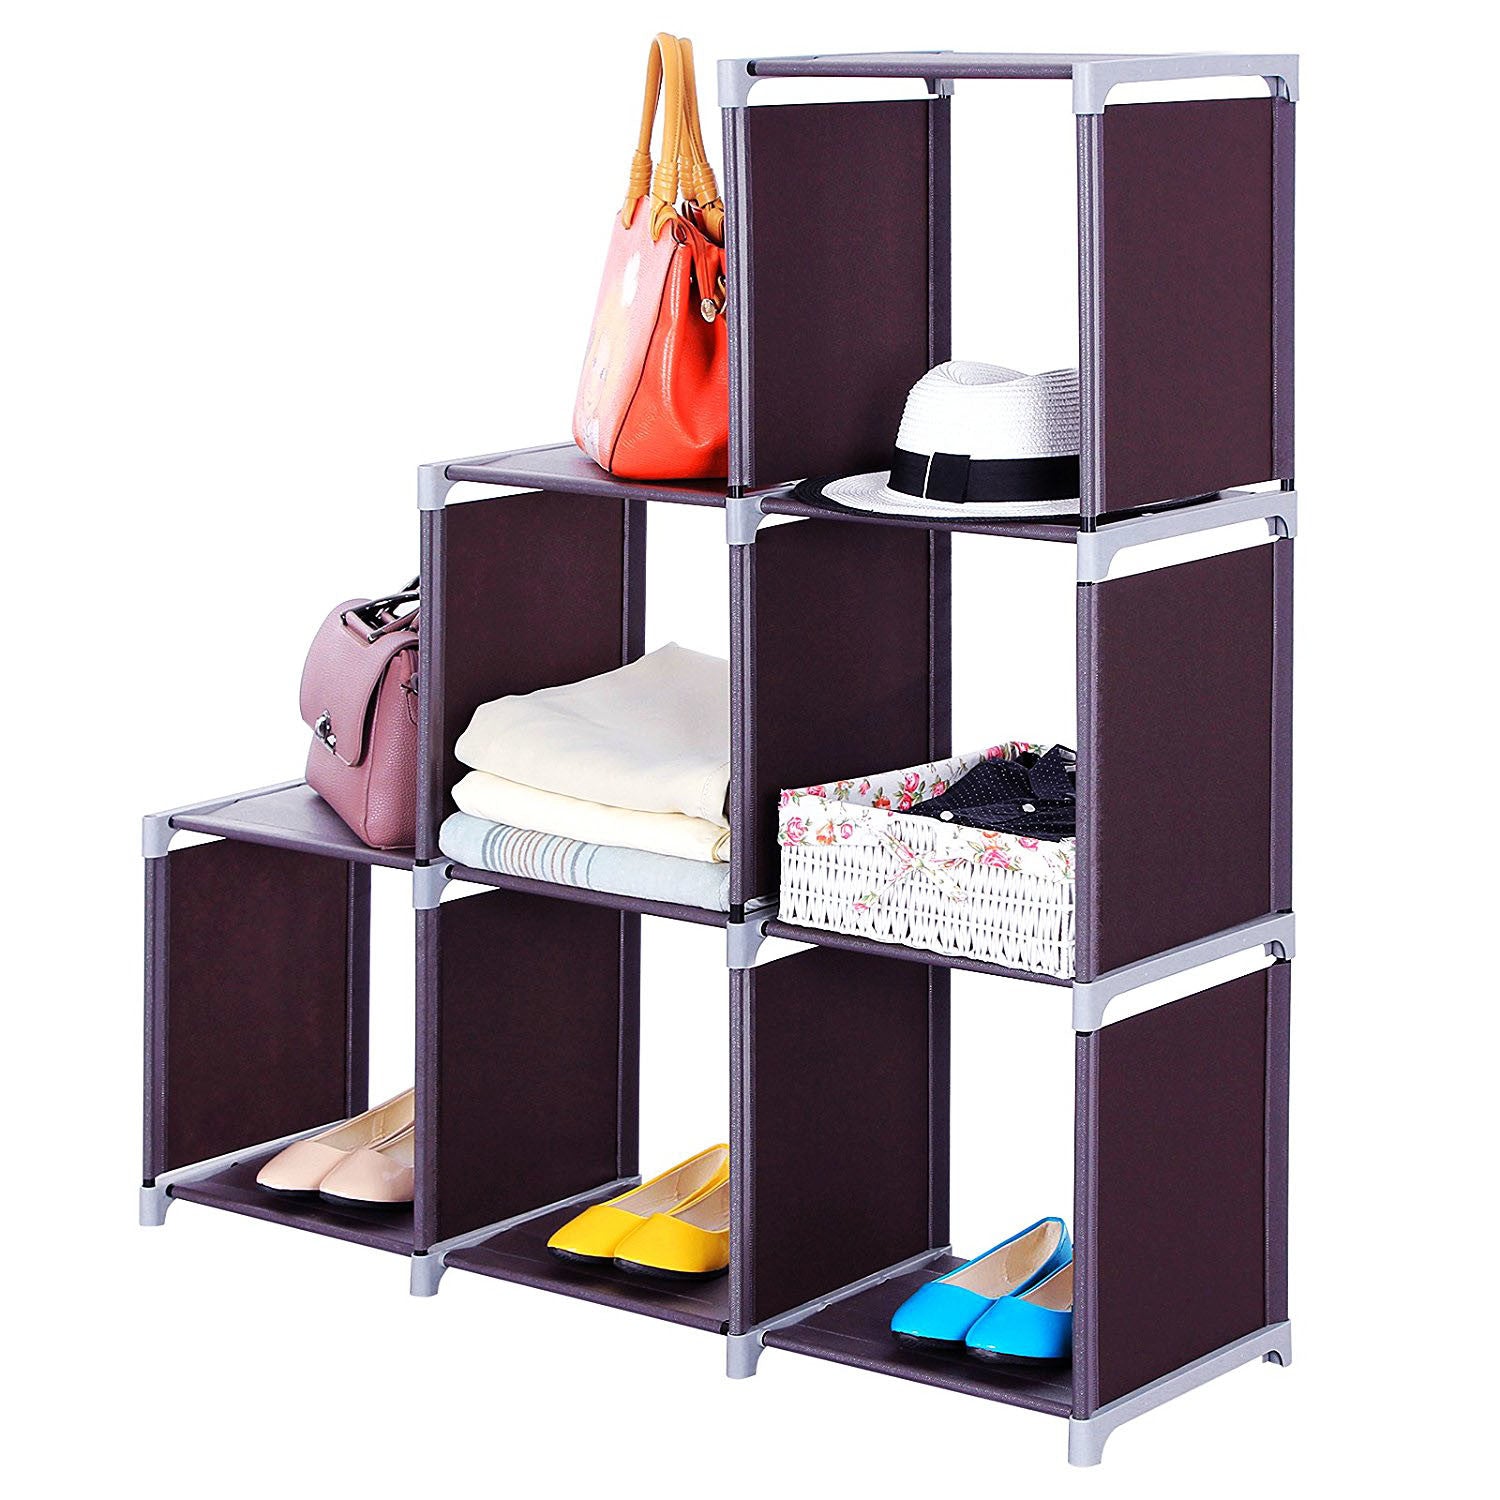 6 Cube Storage Shelves, Assembled Cube Bookcase Multifunctional Assembled 2 Tiers 6 Compartments Storage Organizer Cubes in Living Room, Bedroom RT